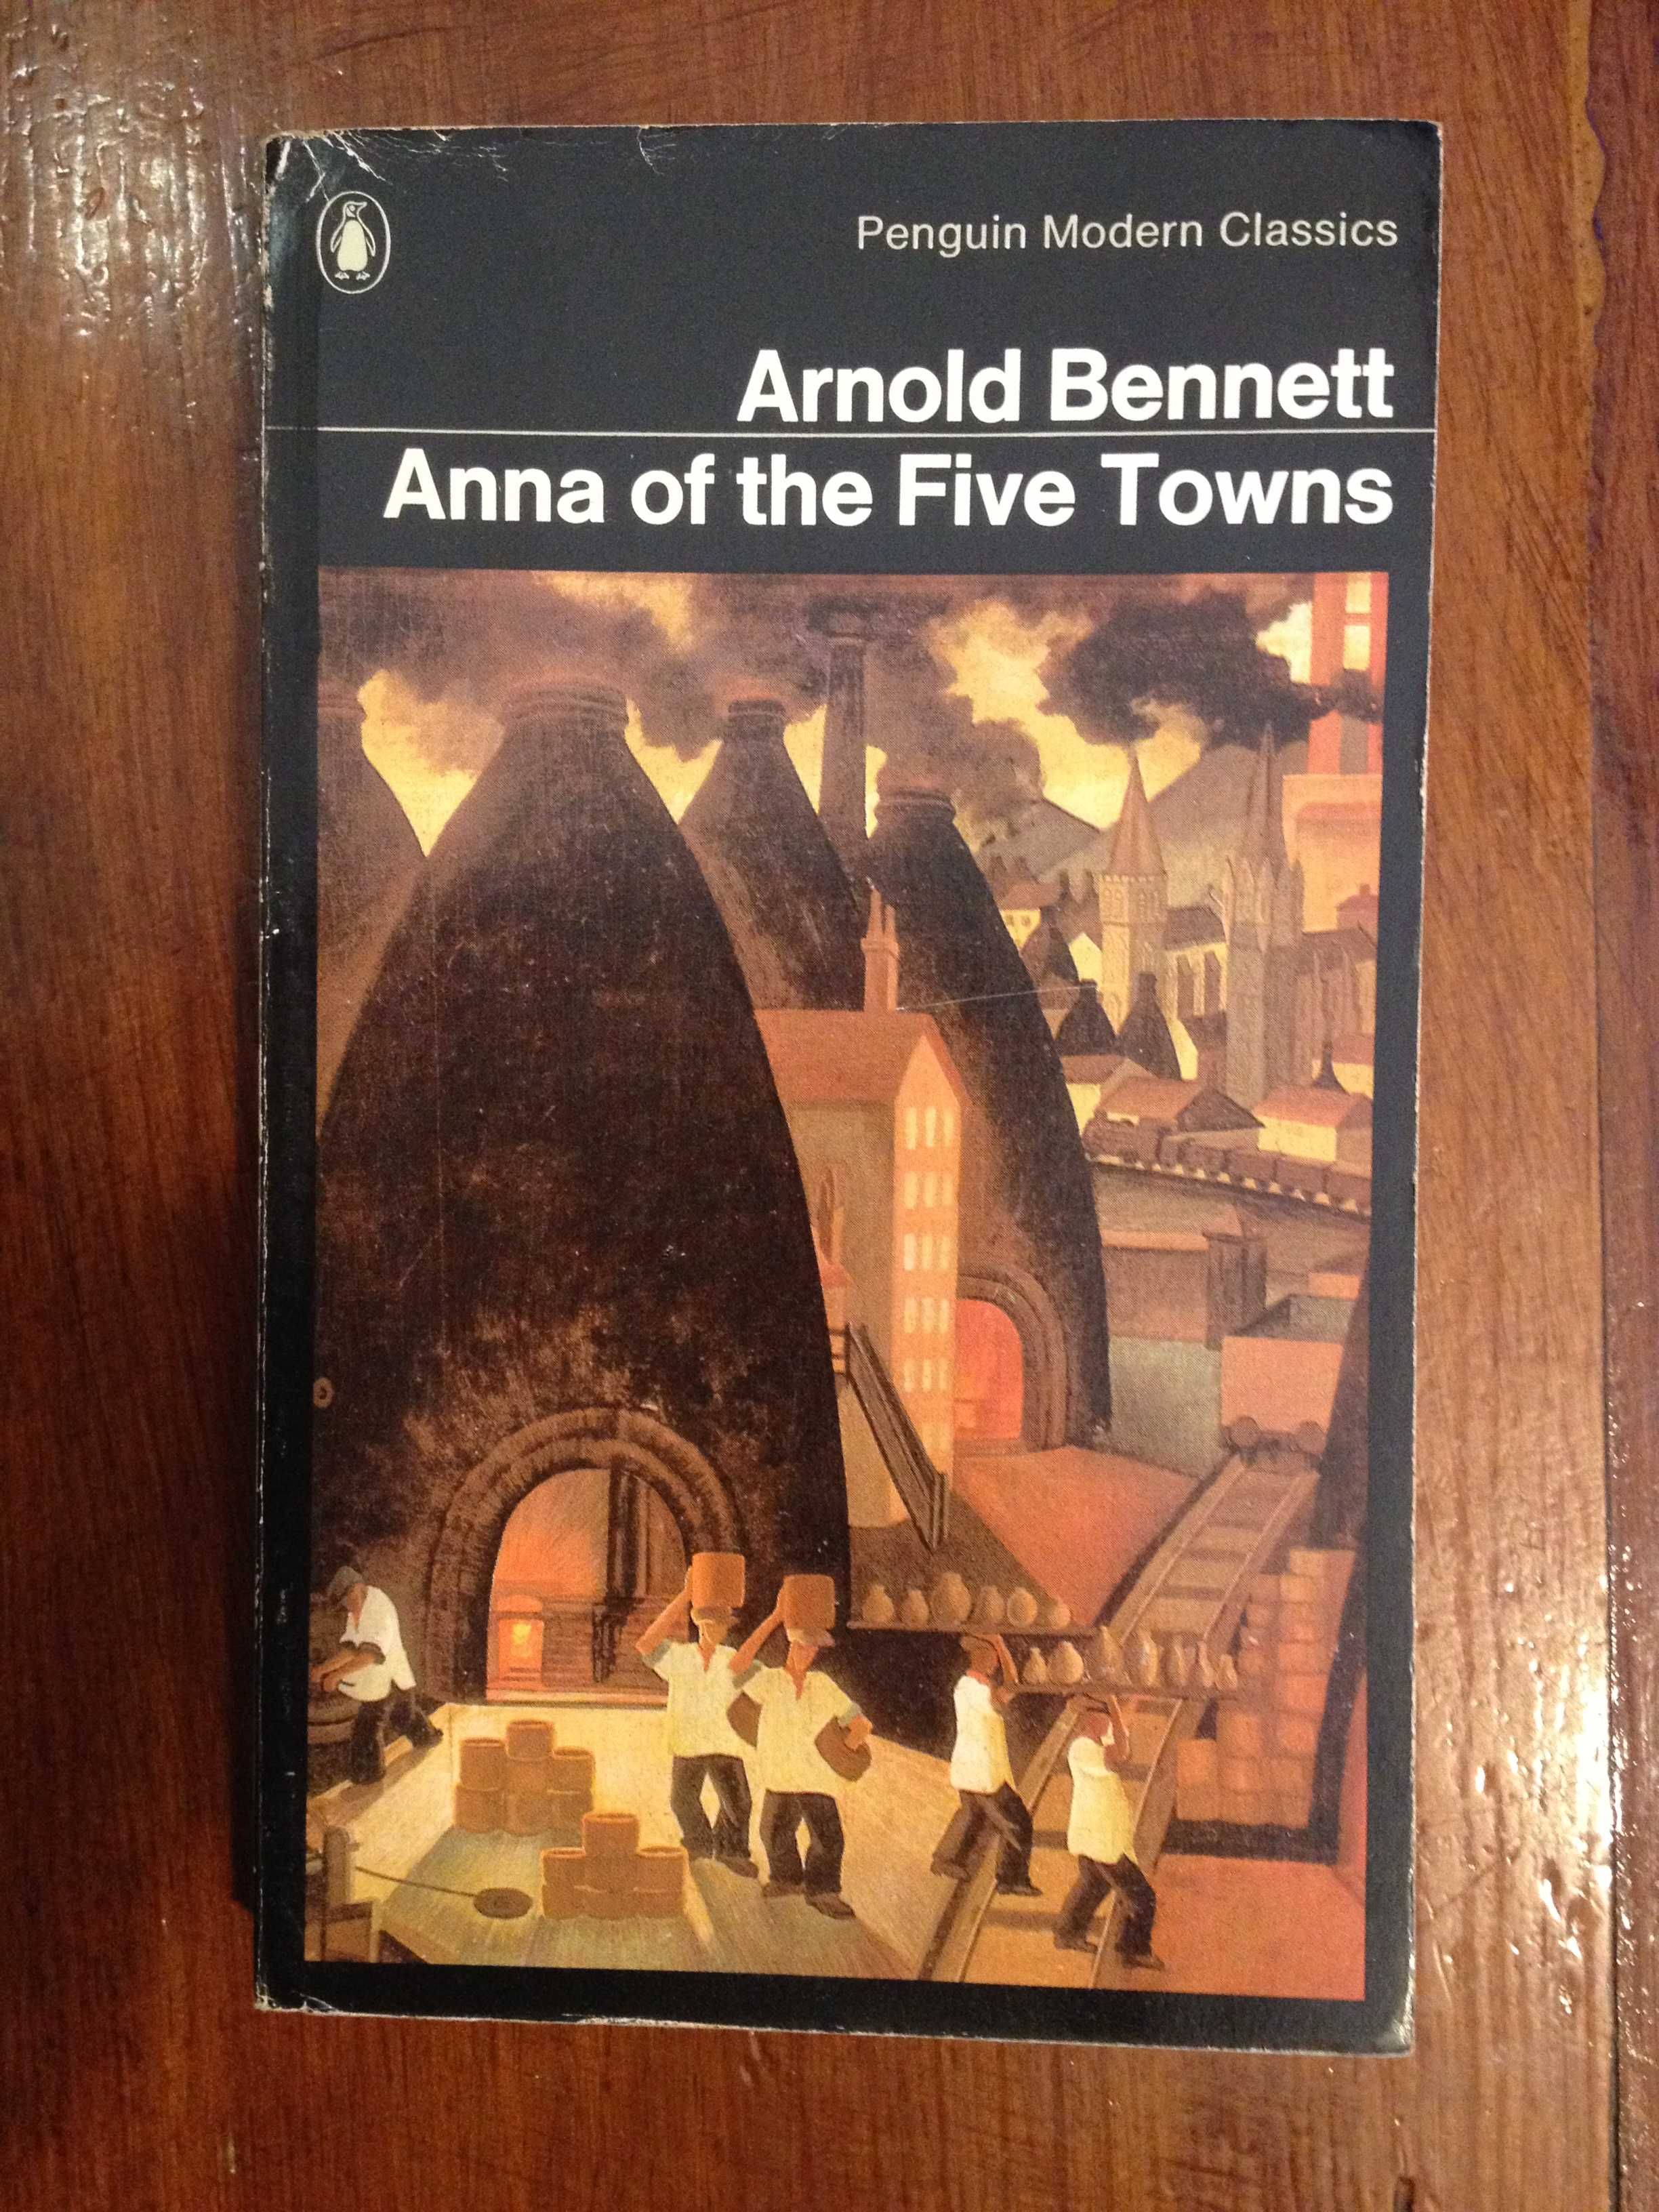 Arnold Bennet - Anna of the five towns